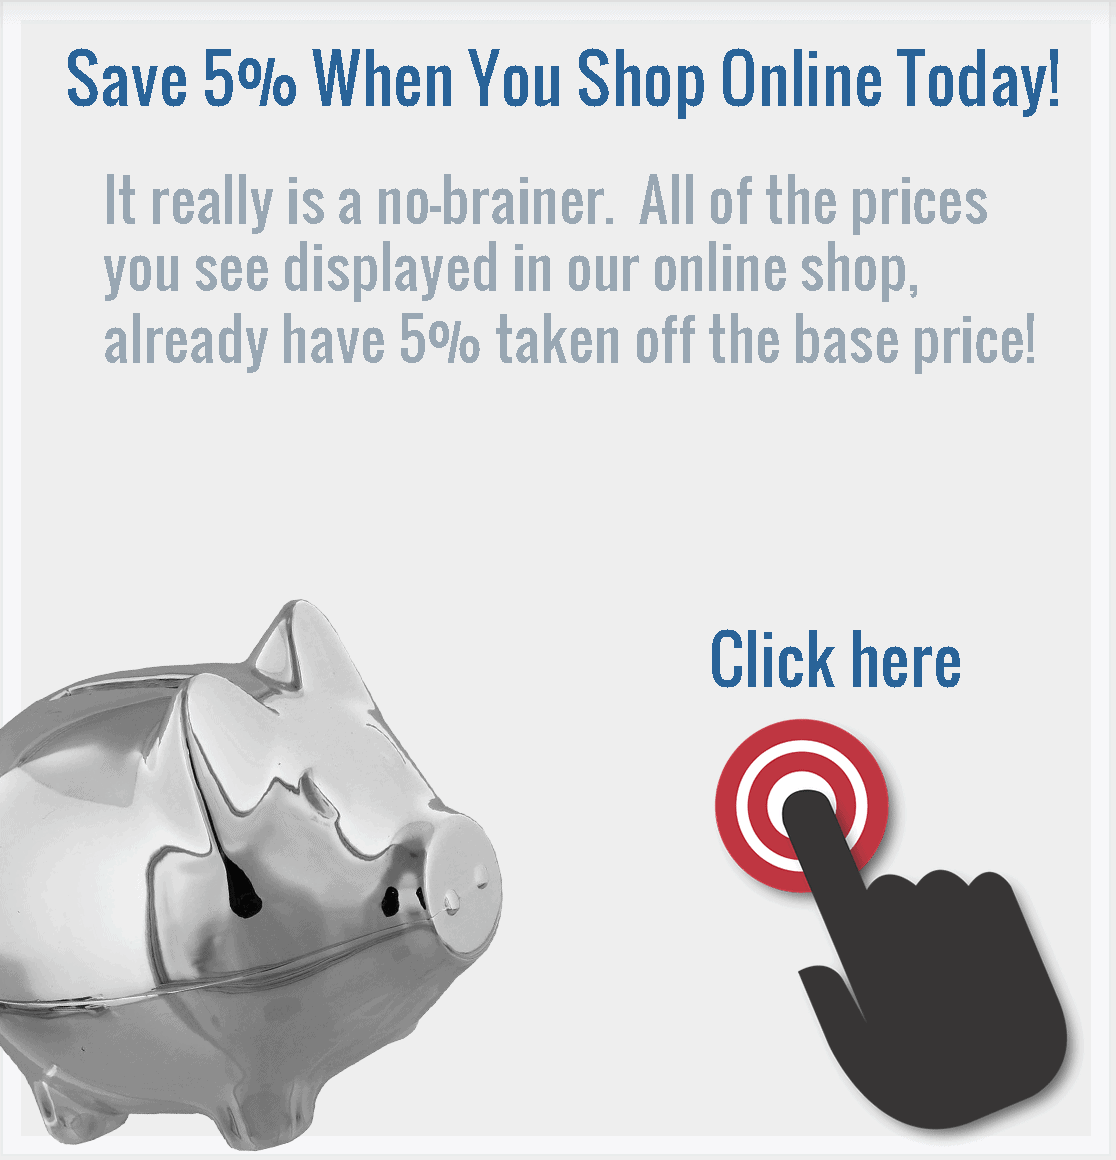 Save when you shop online